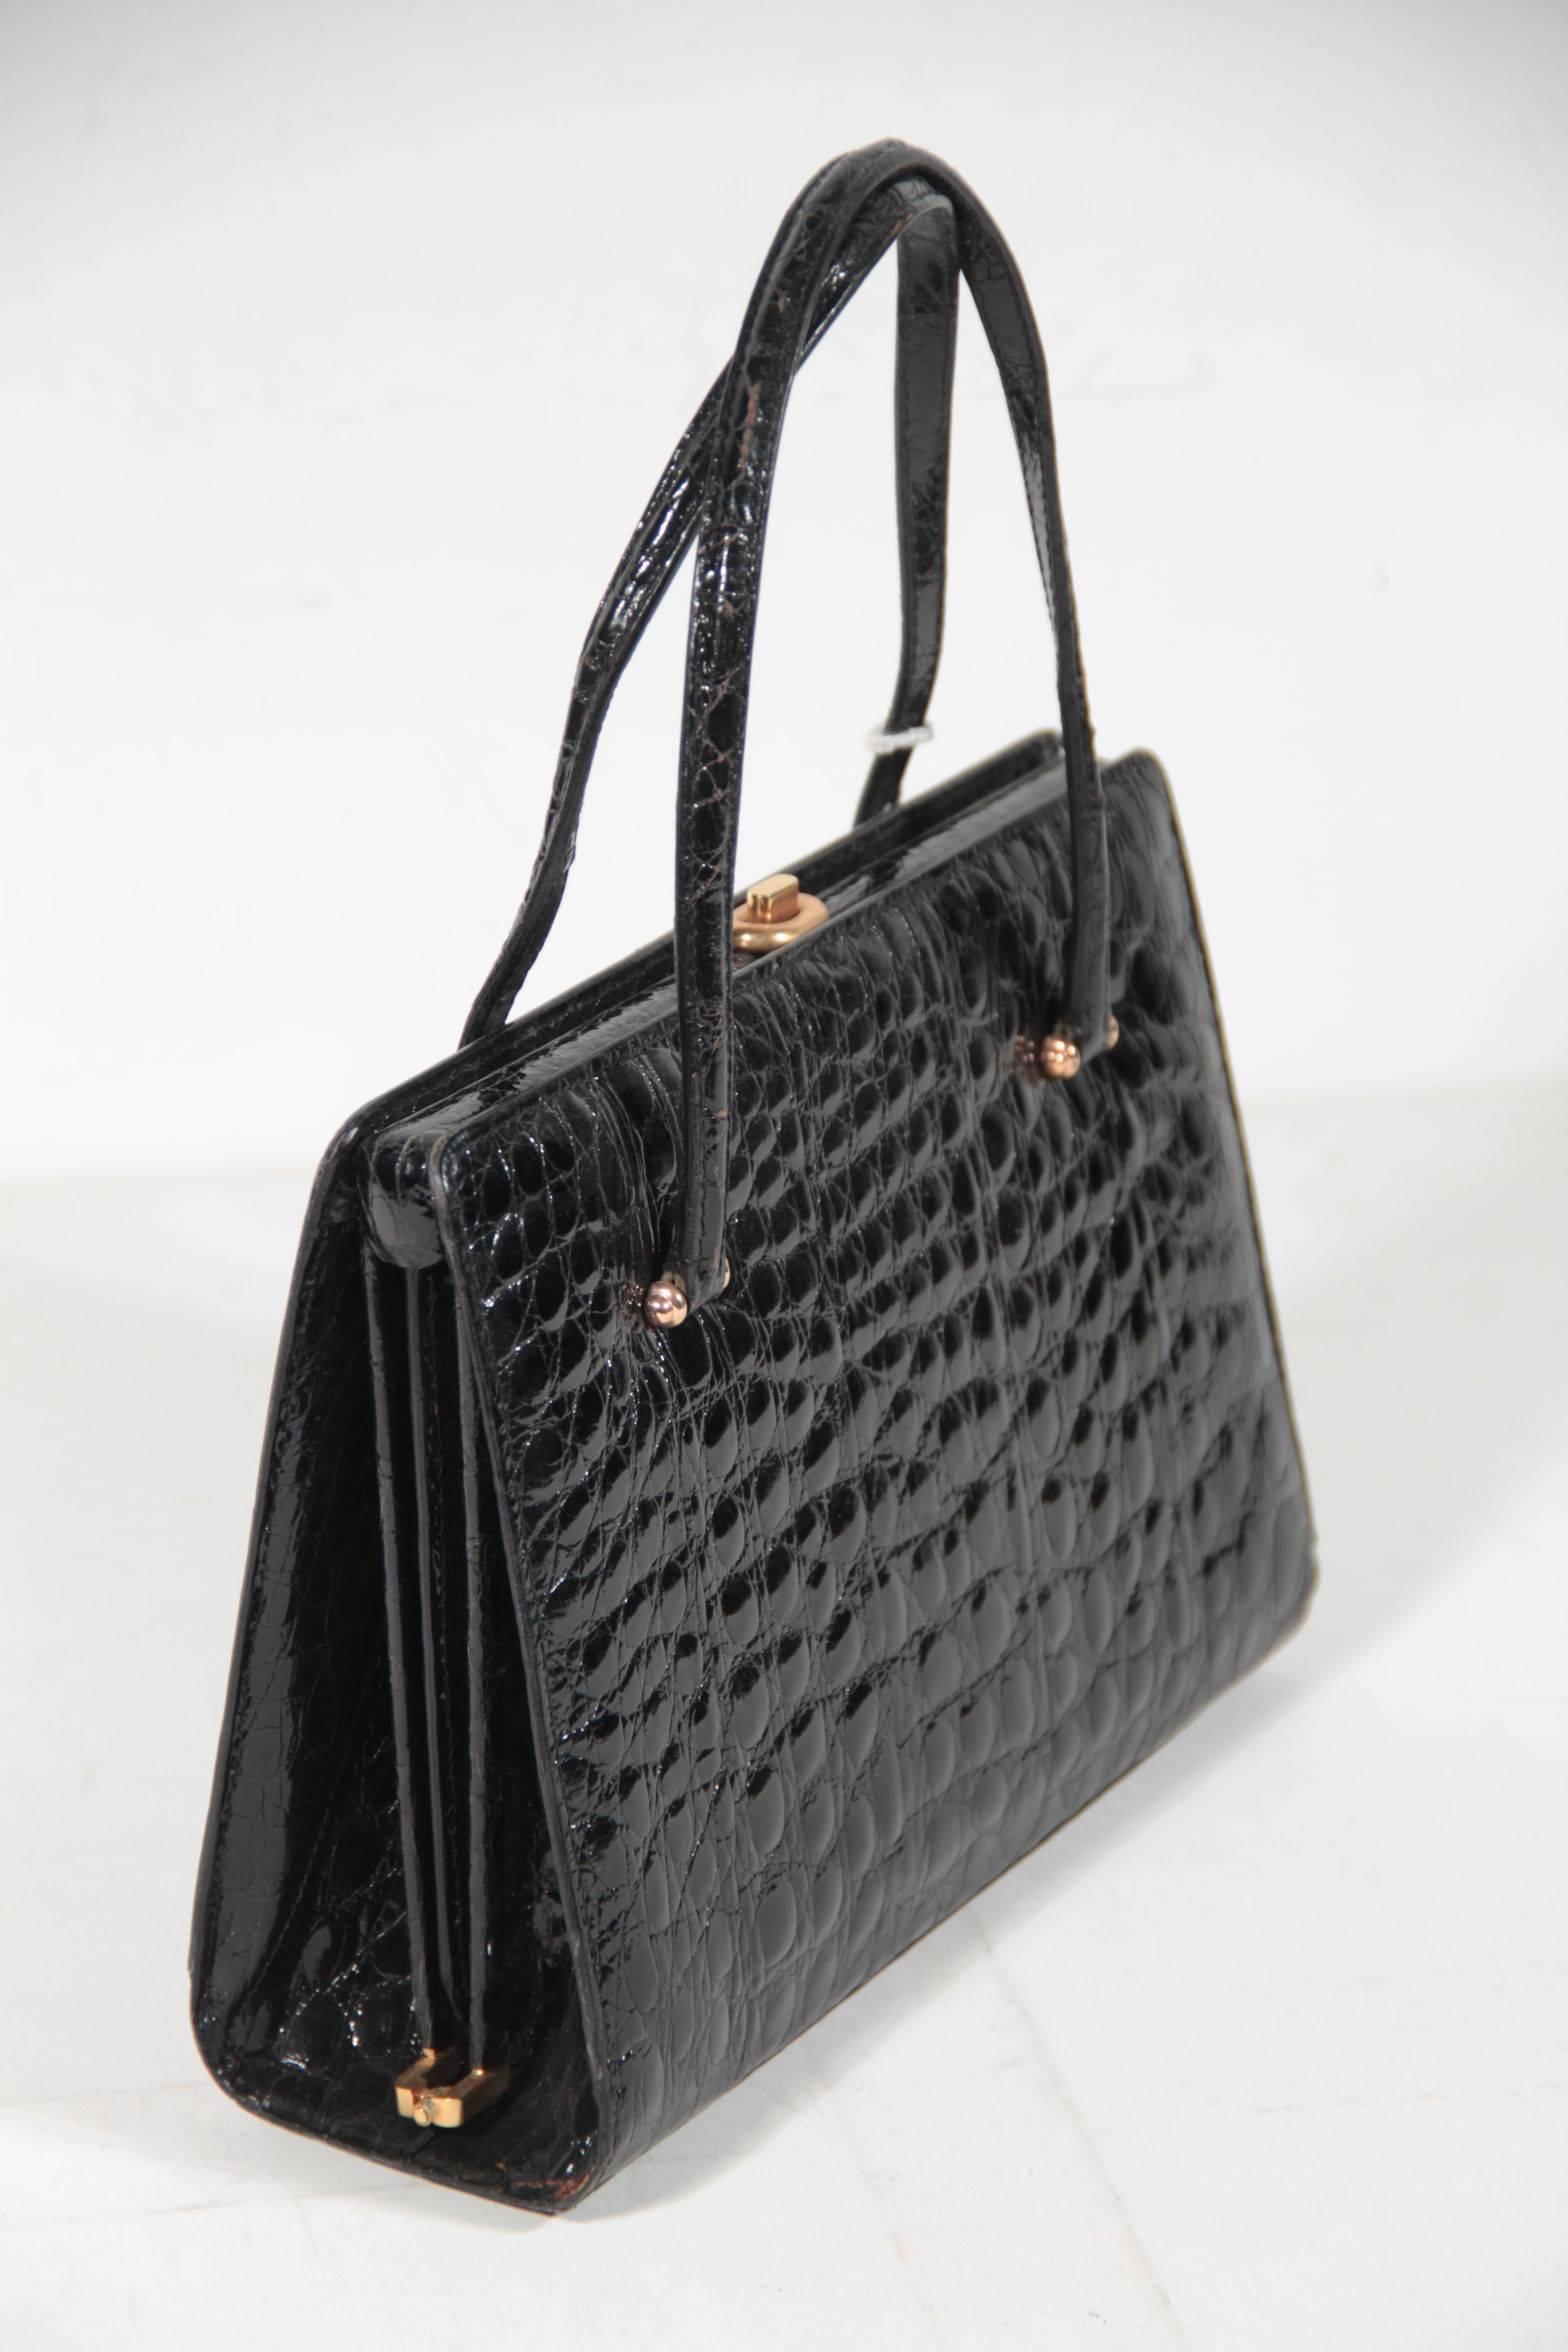 - Period/Era: Circa 1960s

- Black Crocoidle skin

- Double top handles

- Upper push closure

- 4 small protectives bottome feet

- 2 main sections inside with1 middle zip pocket

- 1 side zip pocket, 1 side open pocket and 1 lipstick